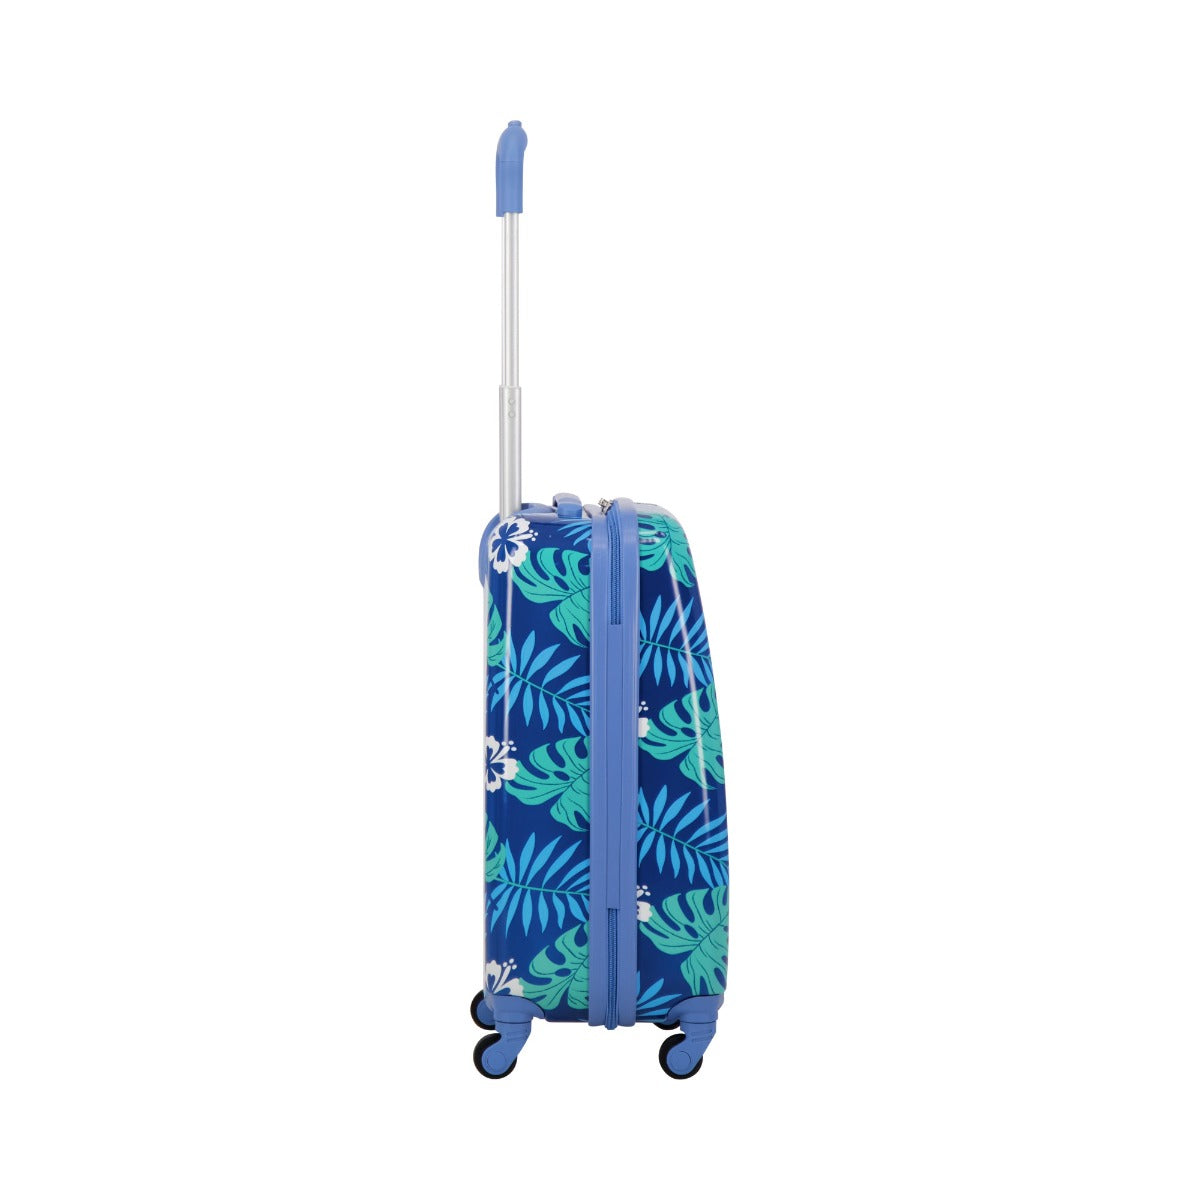 Disney Ful Stitch tropical leaves 2 piece set - 21" carry-on suitcase for kids